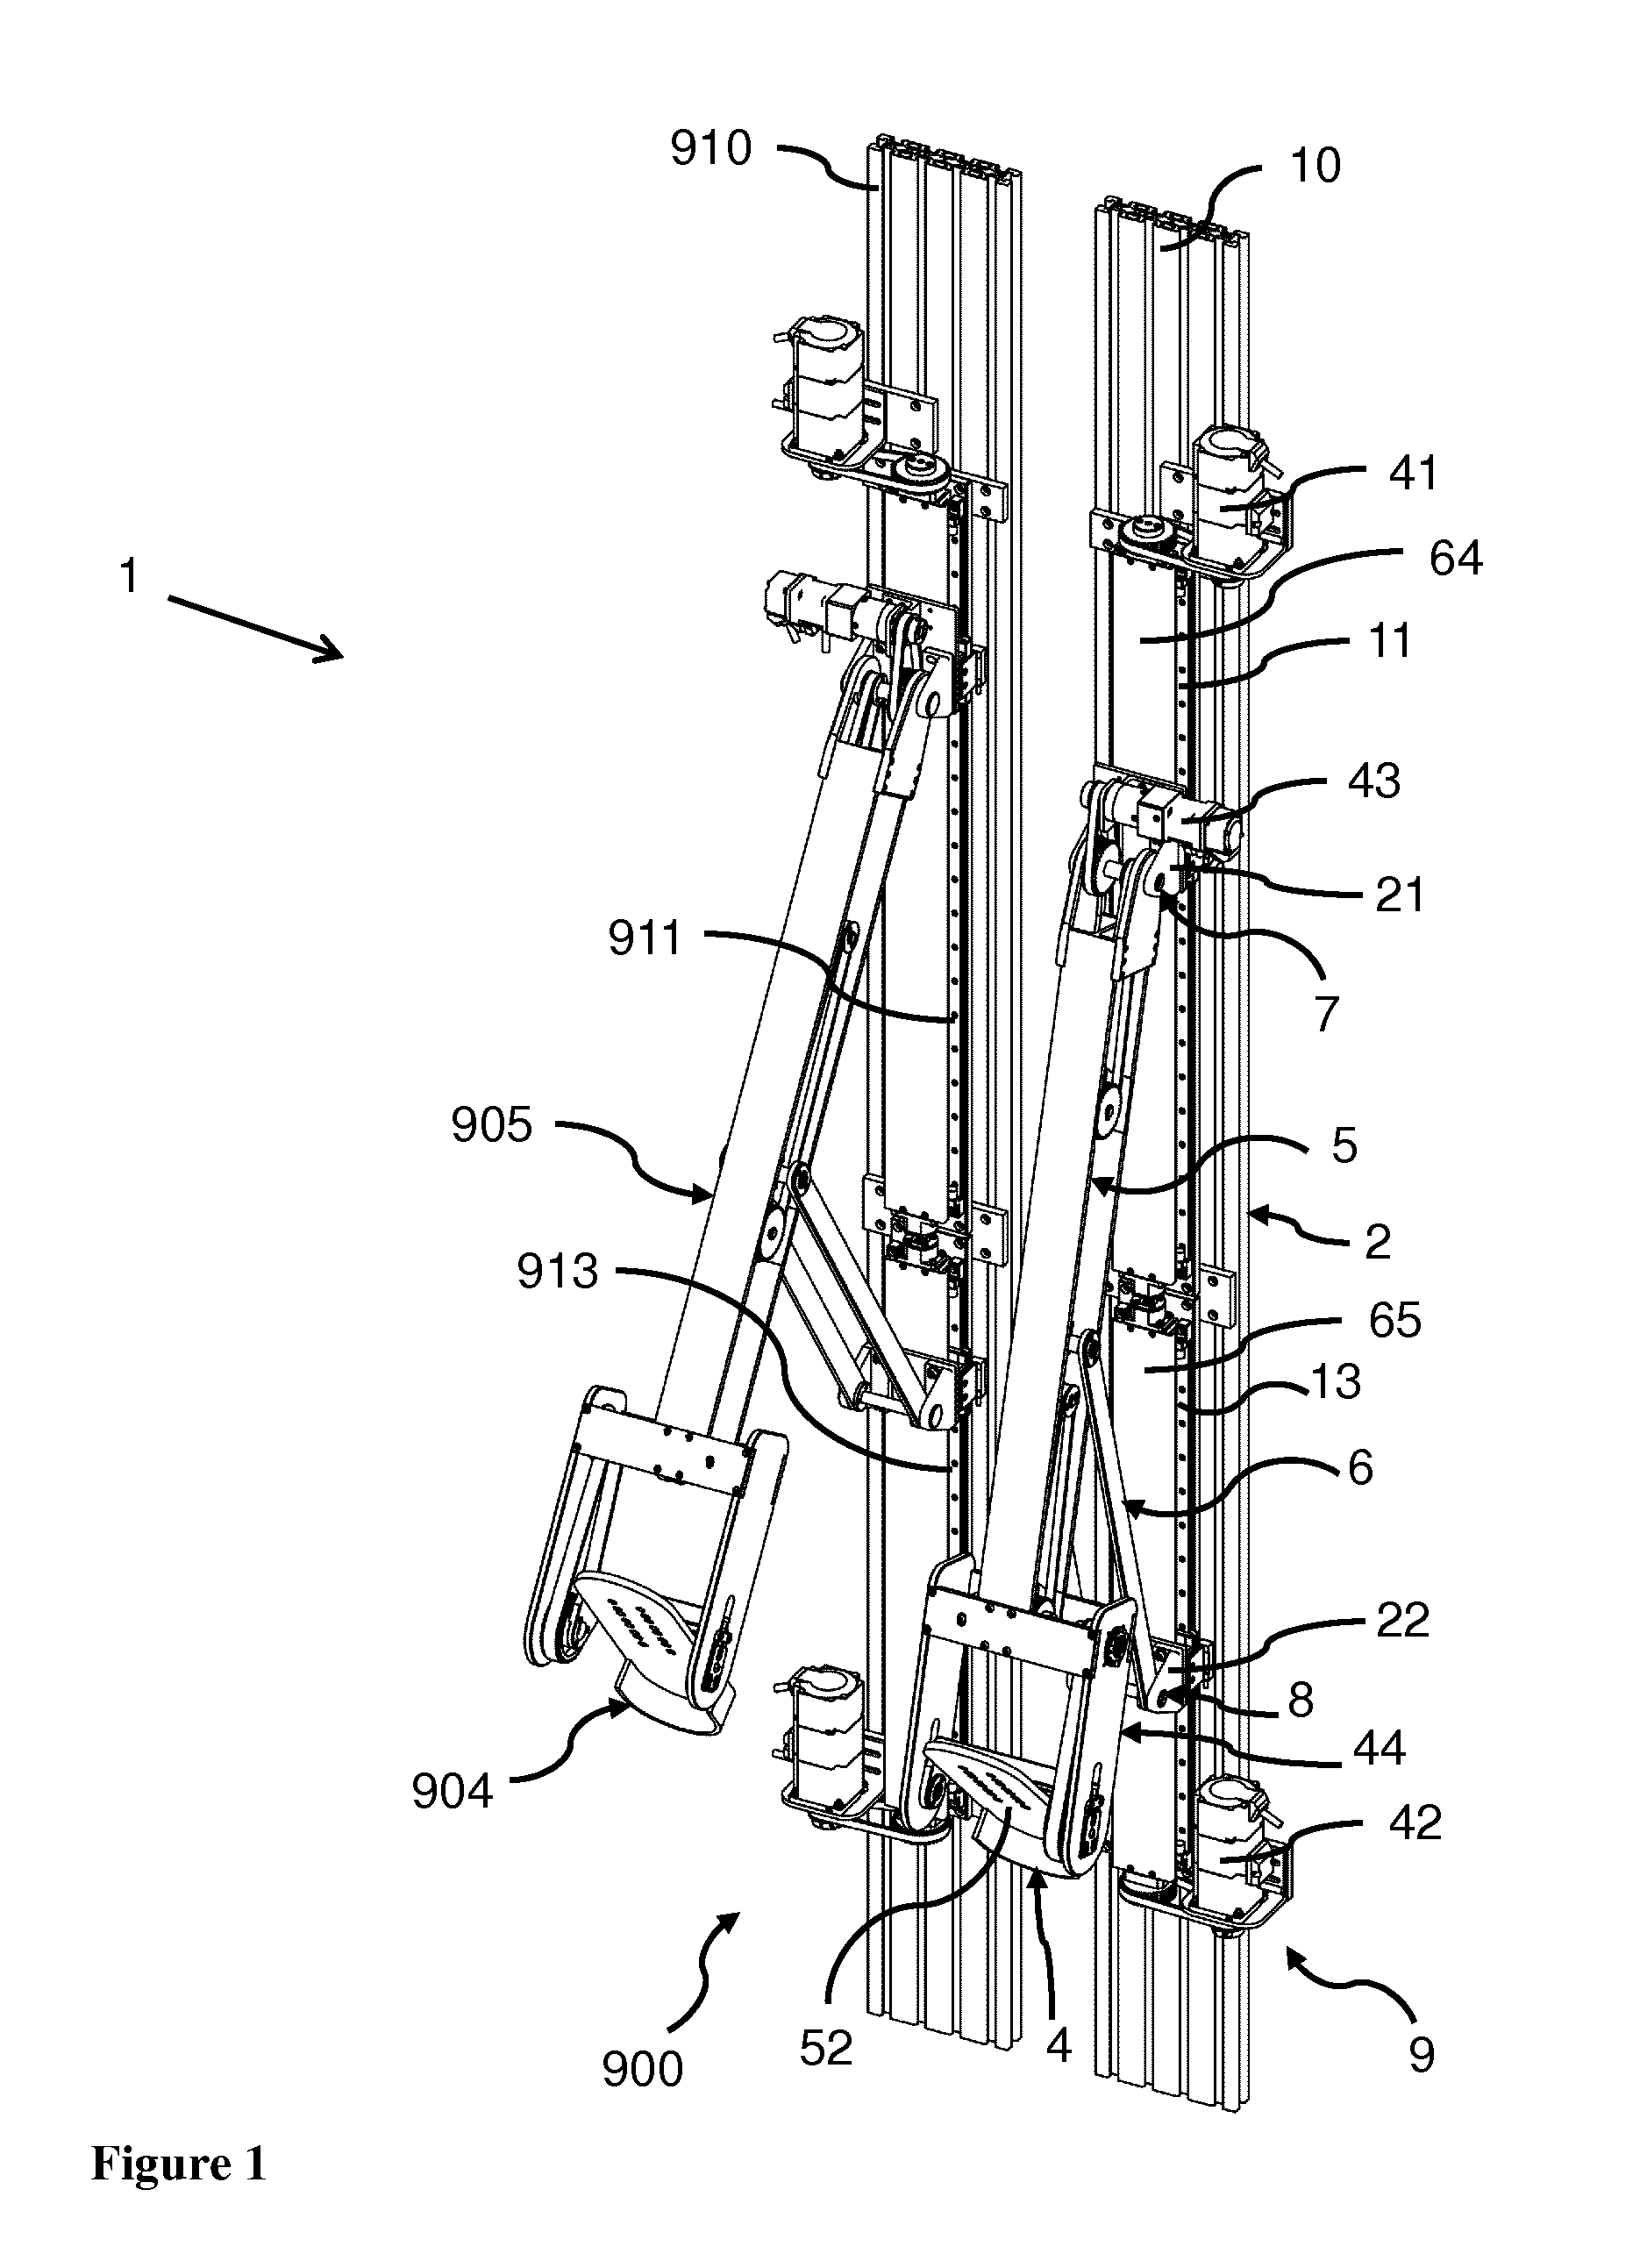 Systems, Devices and Methods for Exercising the Lower Limbs